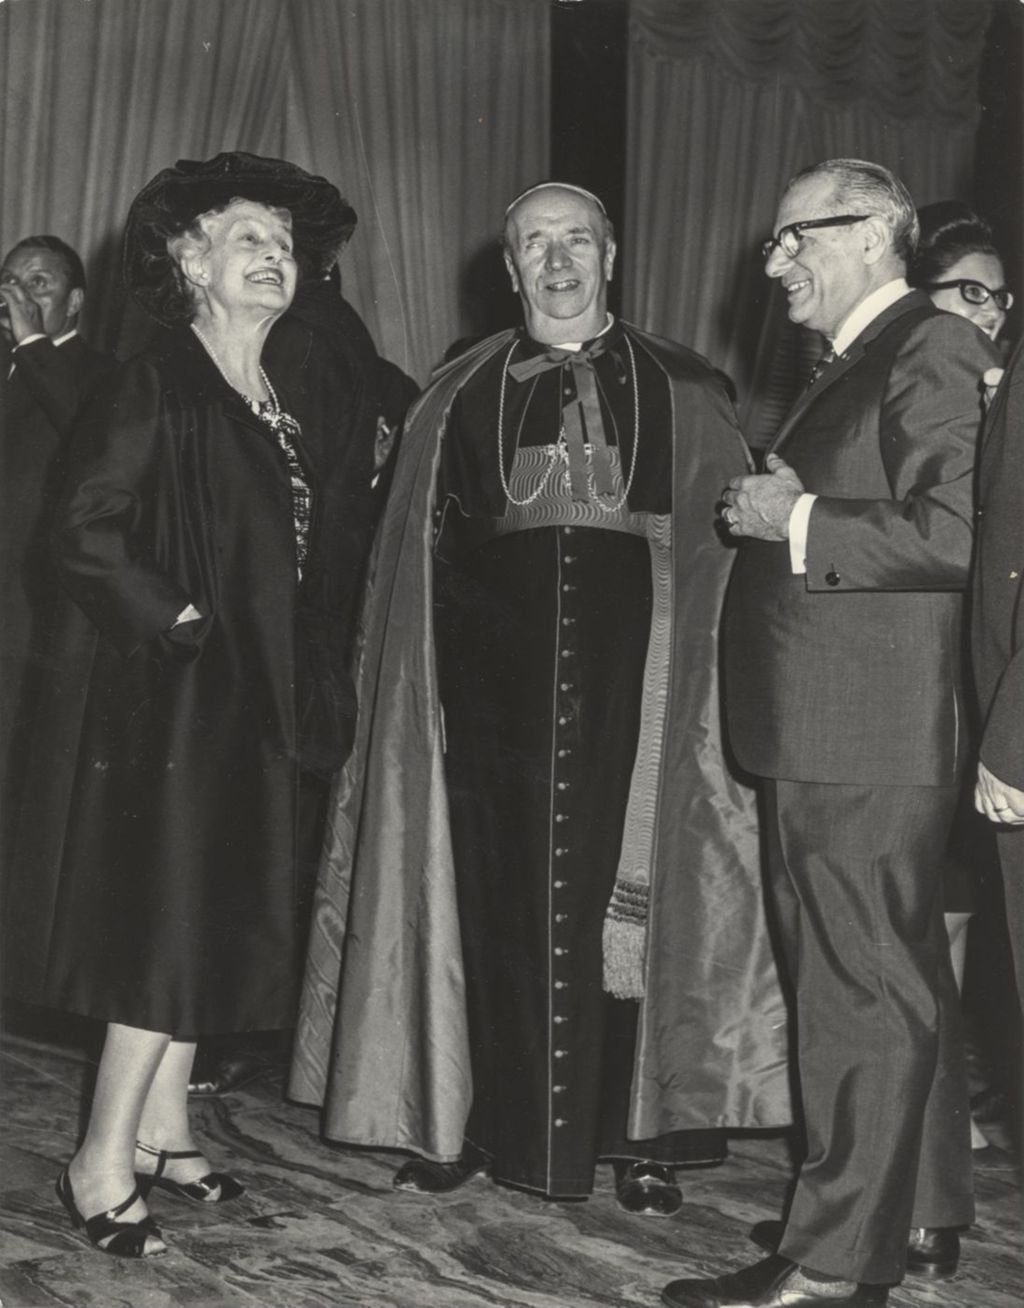 Frank Chesrow, Cardinal Ottaviani and a woman at a reception in Rome